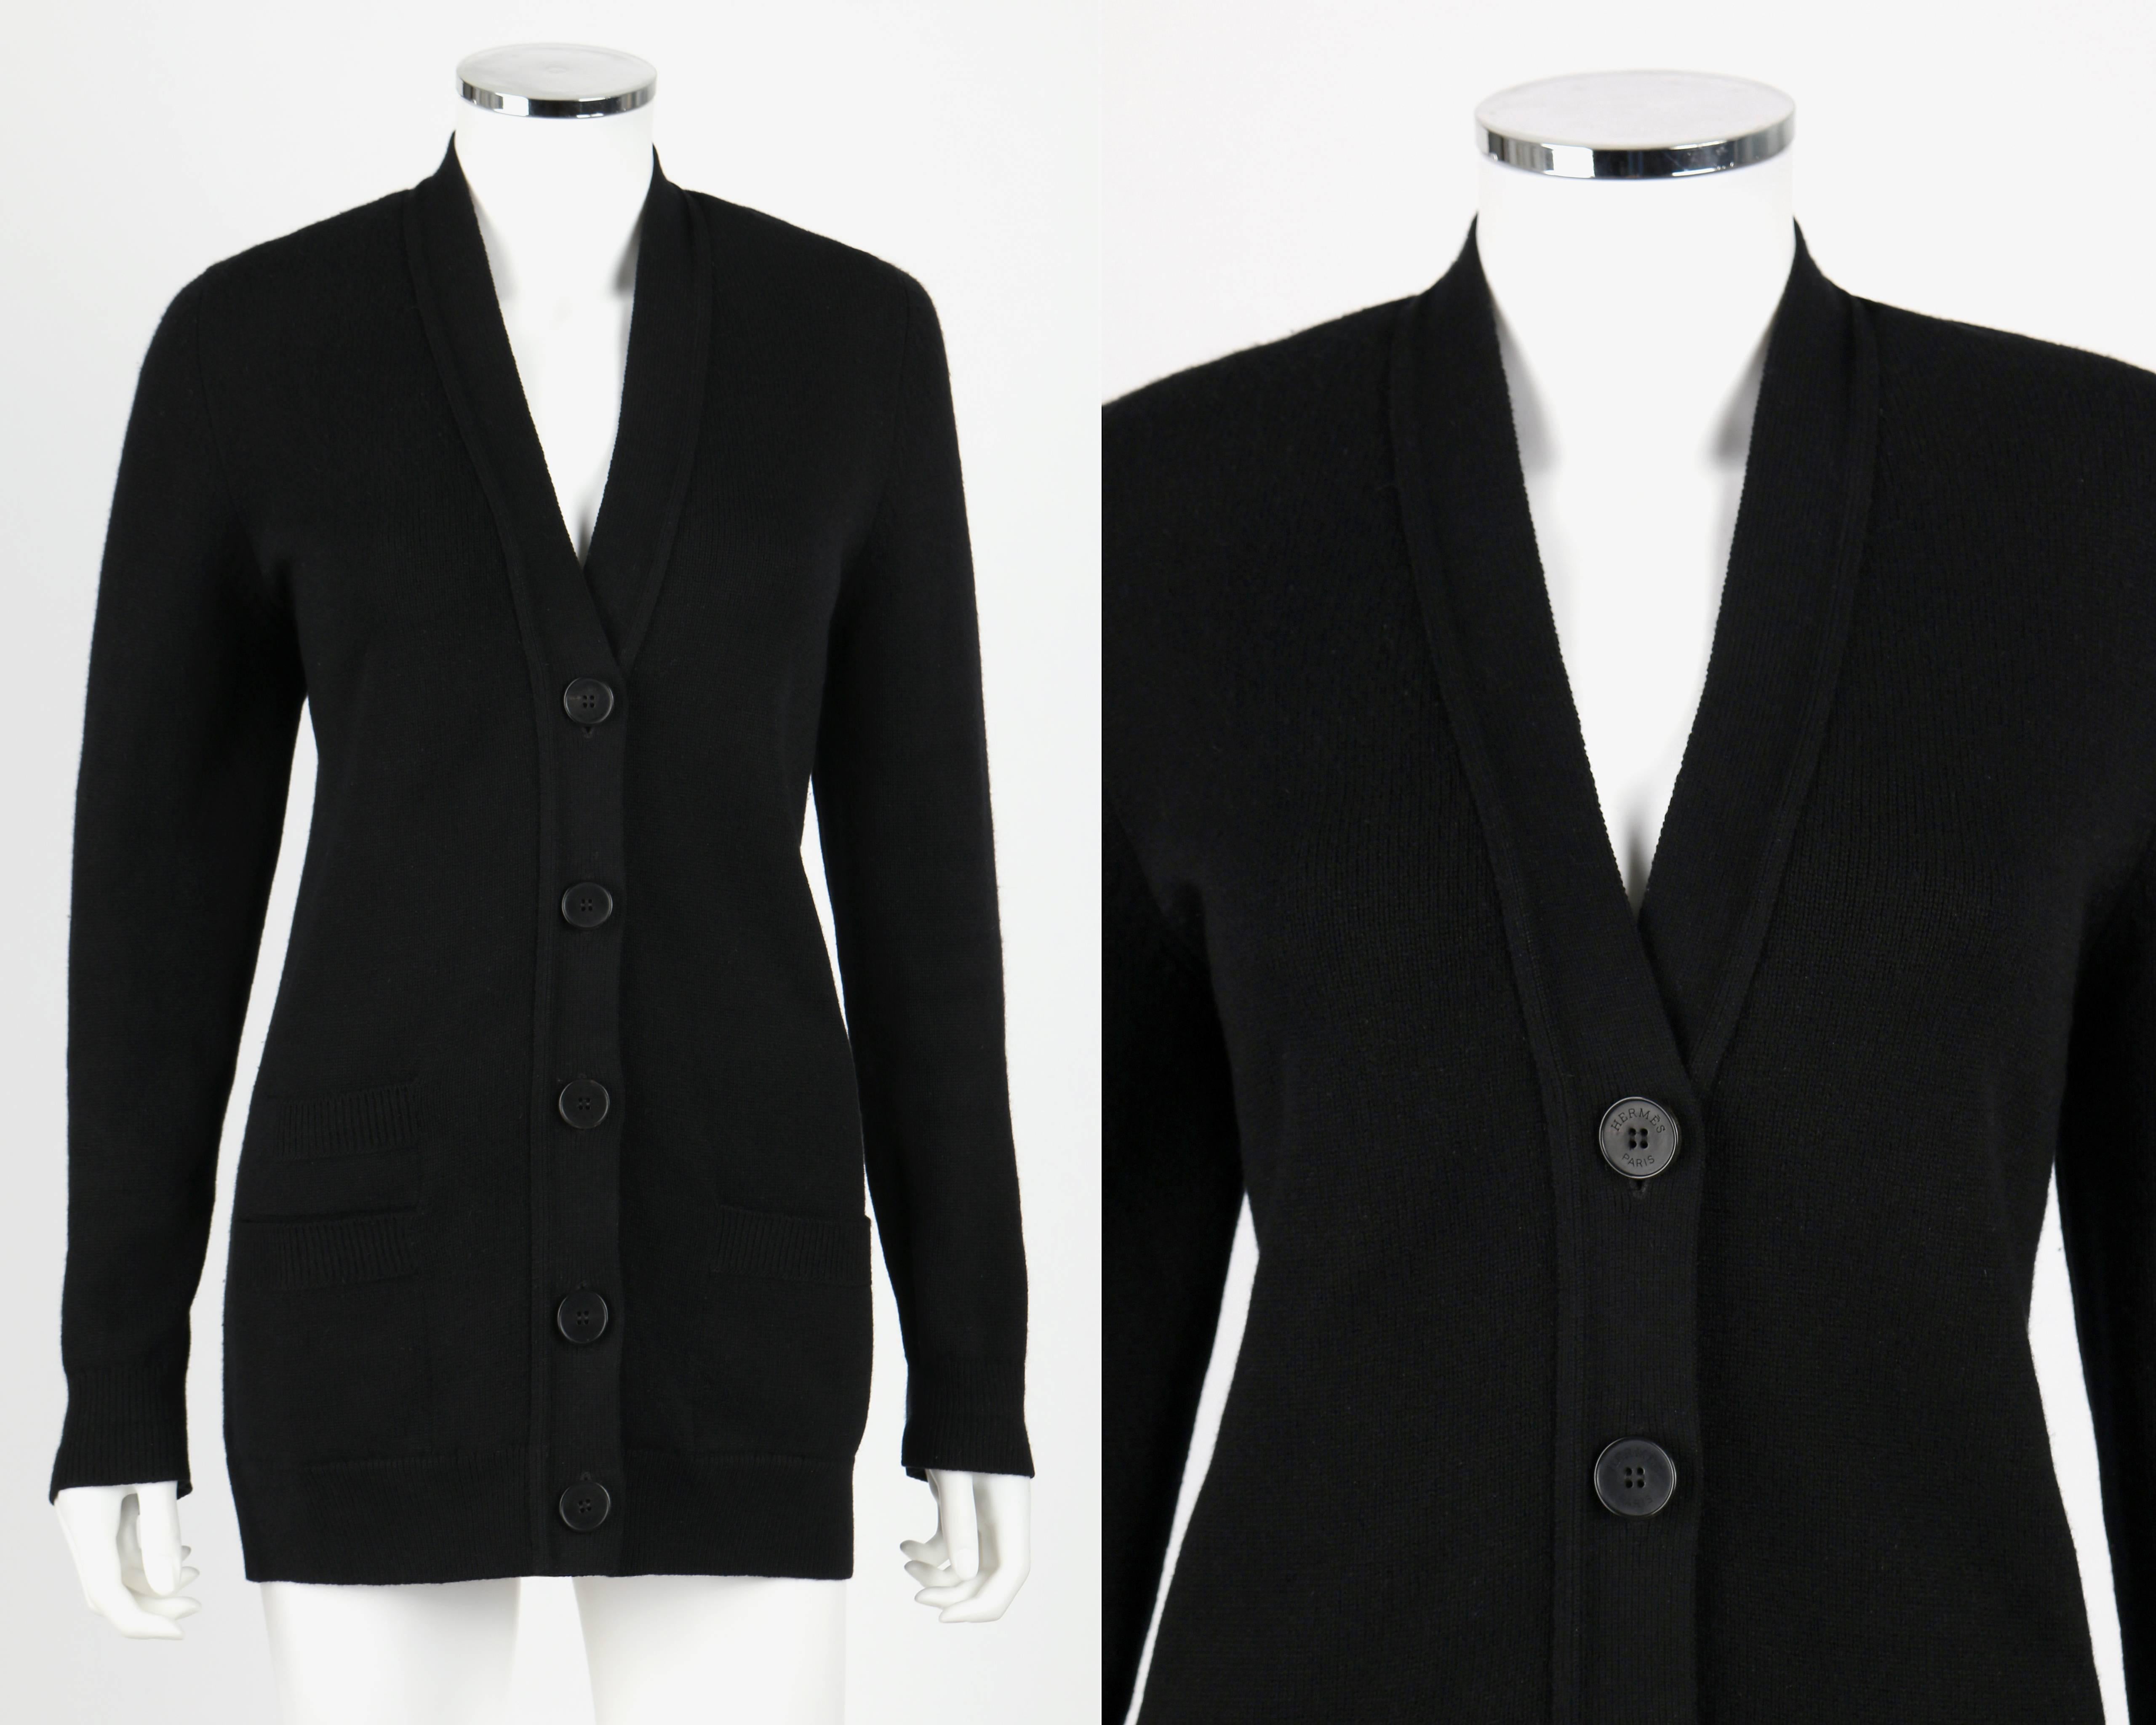 Hermes long black 100% cashmere cardigan sweater. V-neckline. Five button front closure. Three inset pockets: One on the front left side, two stacked on the right. Rib knit detail along hem, cuffs and pockets. Buttons embossed with signature